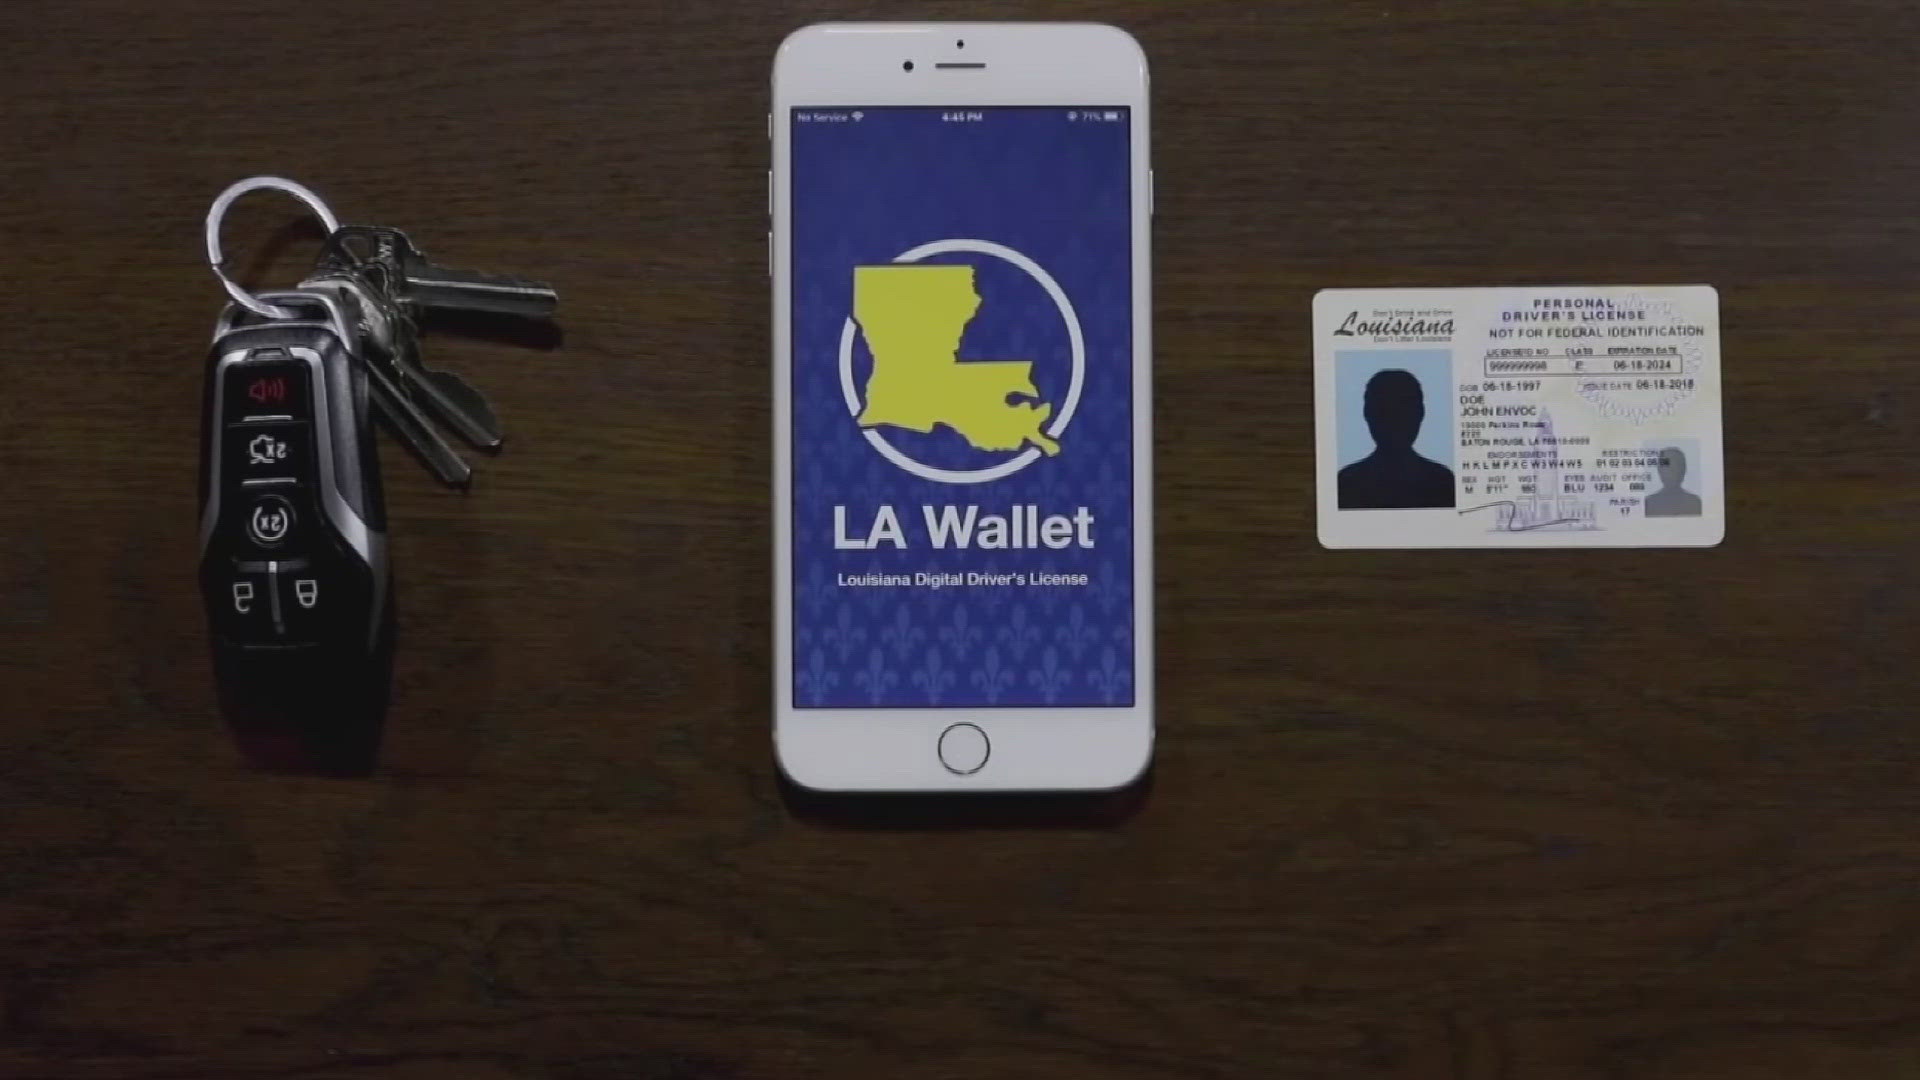 Officials say all you have to do is pull up your digital ID or driver's license on the LA Wallet app, then tap your phone at the scanner or scan QR code on the app.